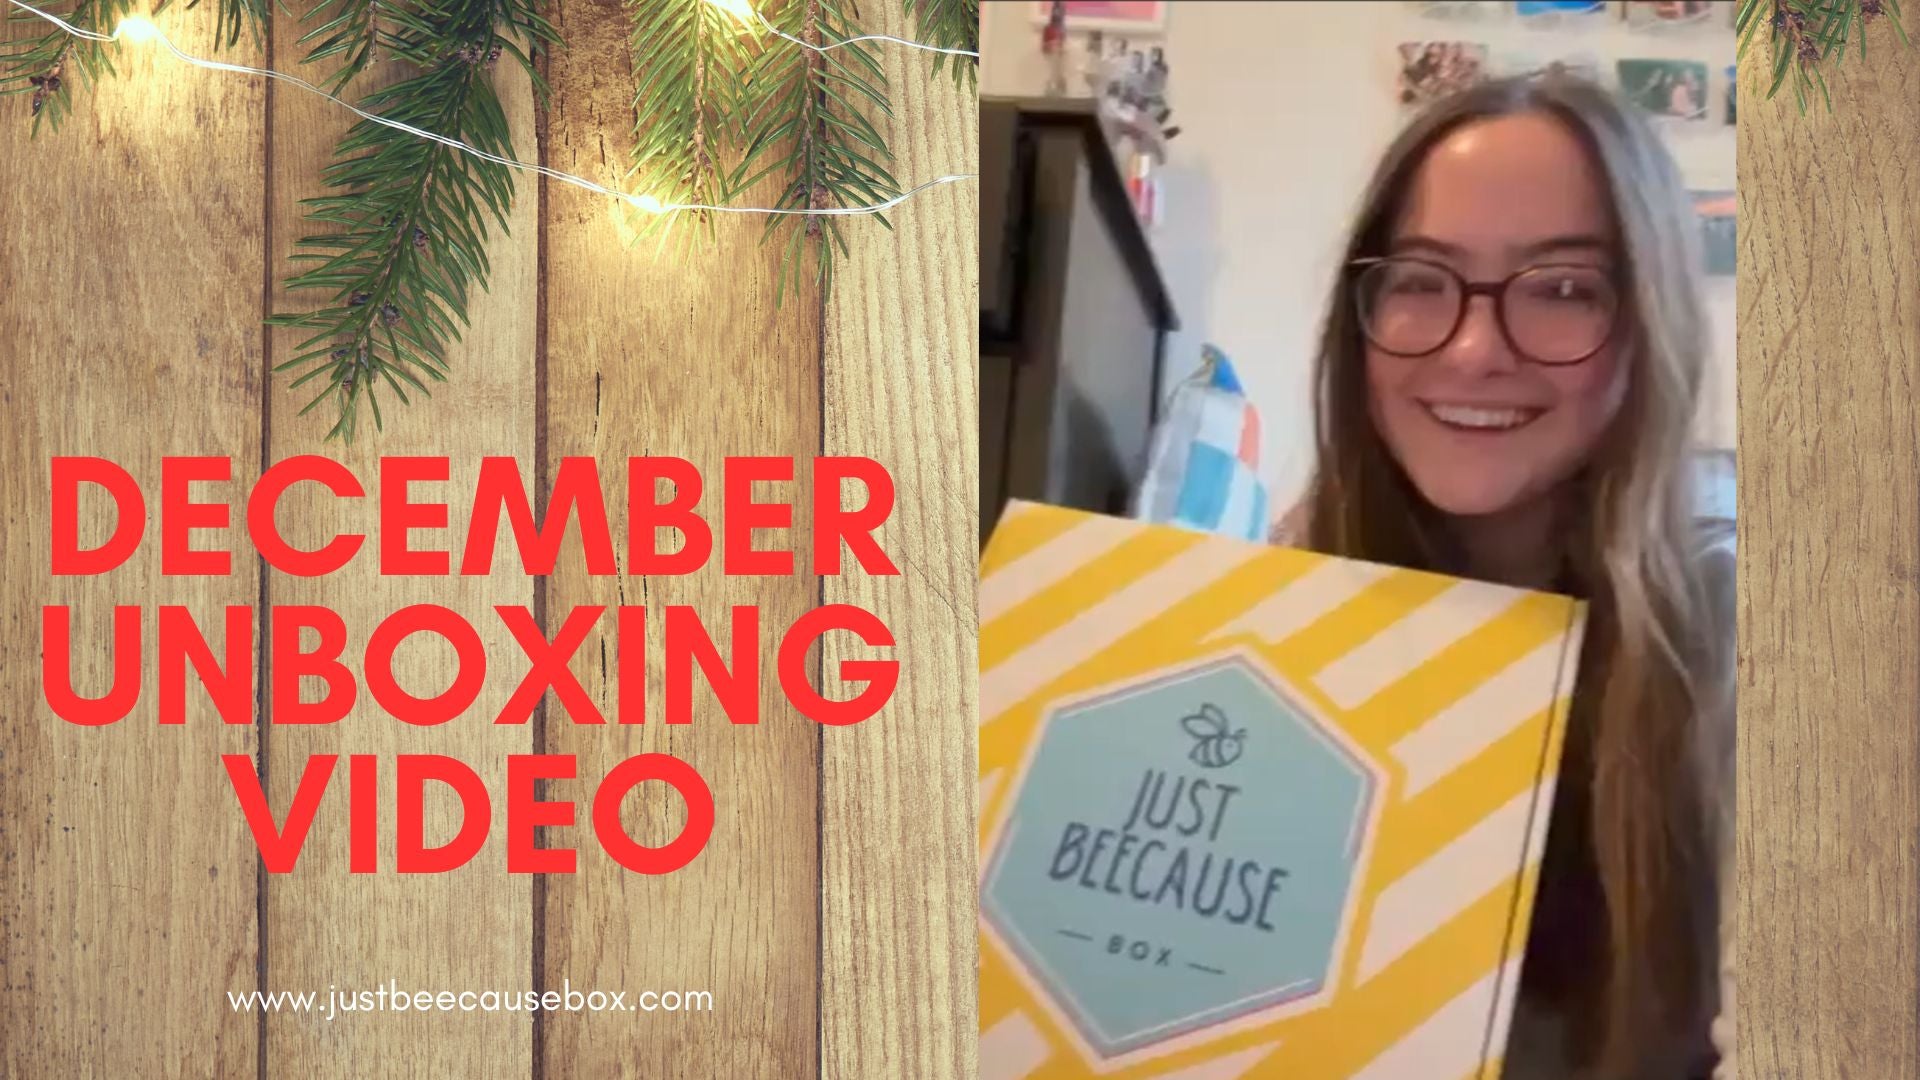 Load video: December unboxing video